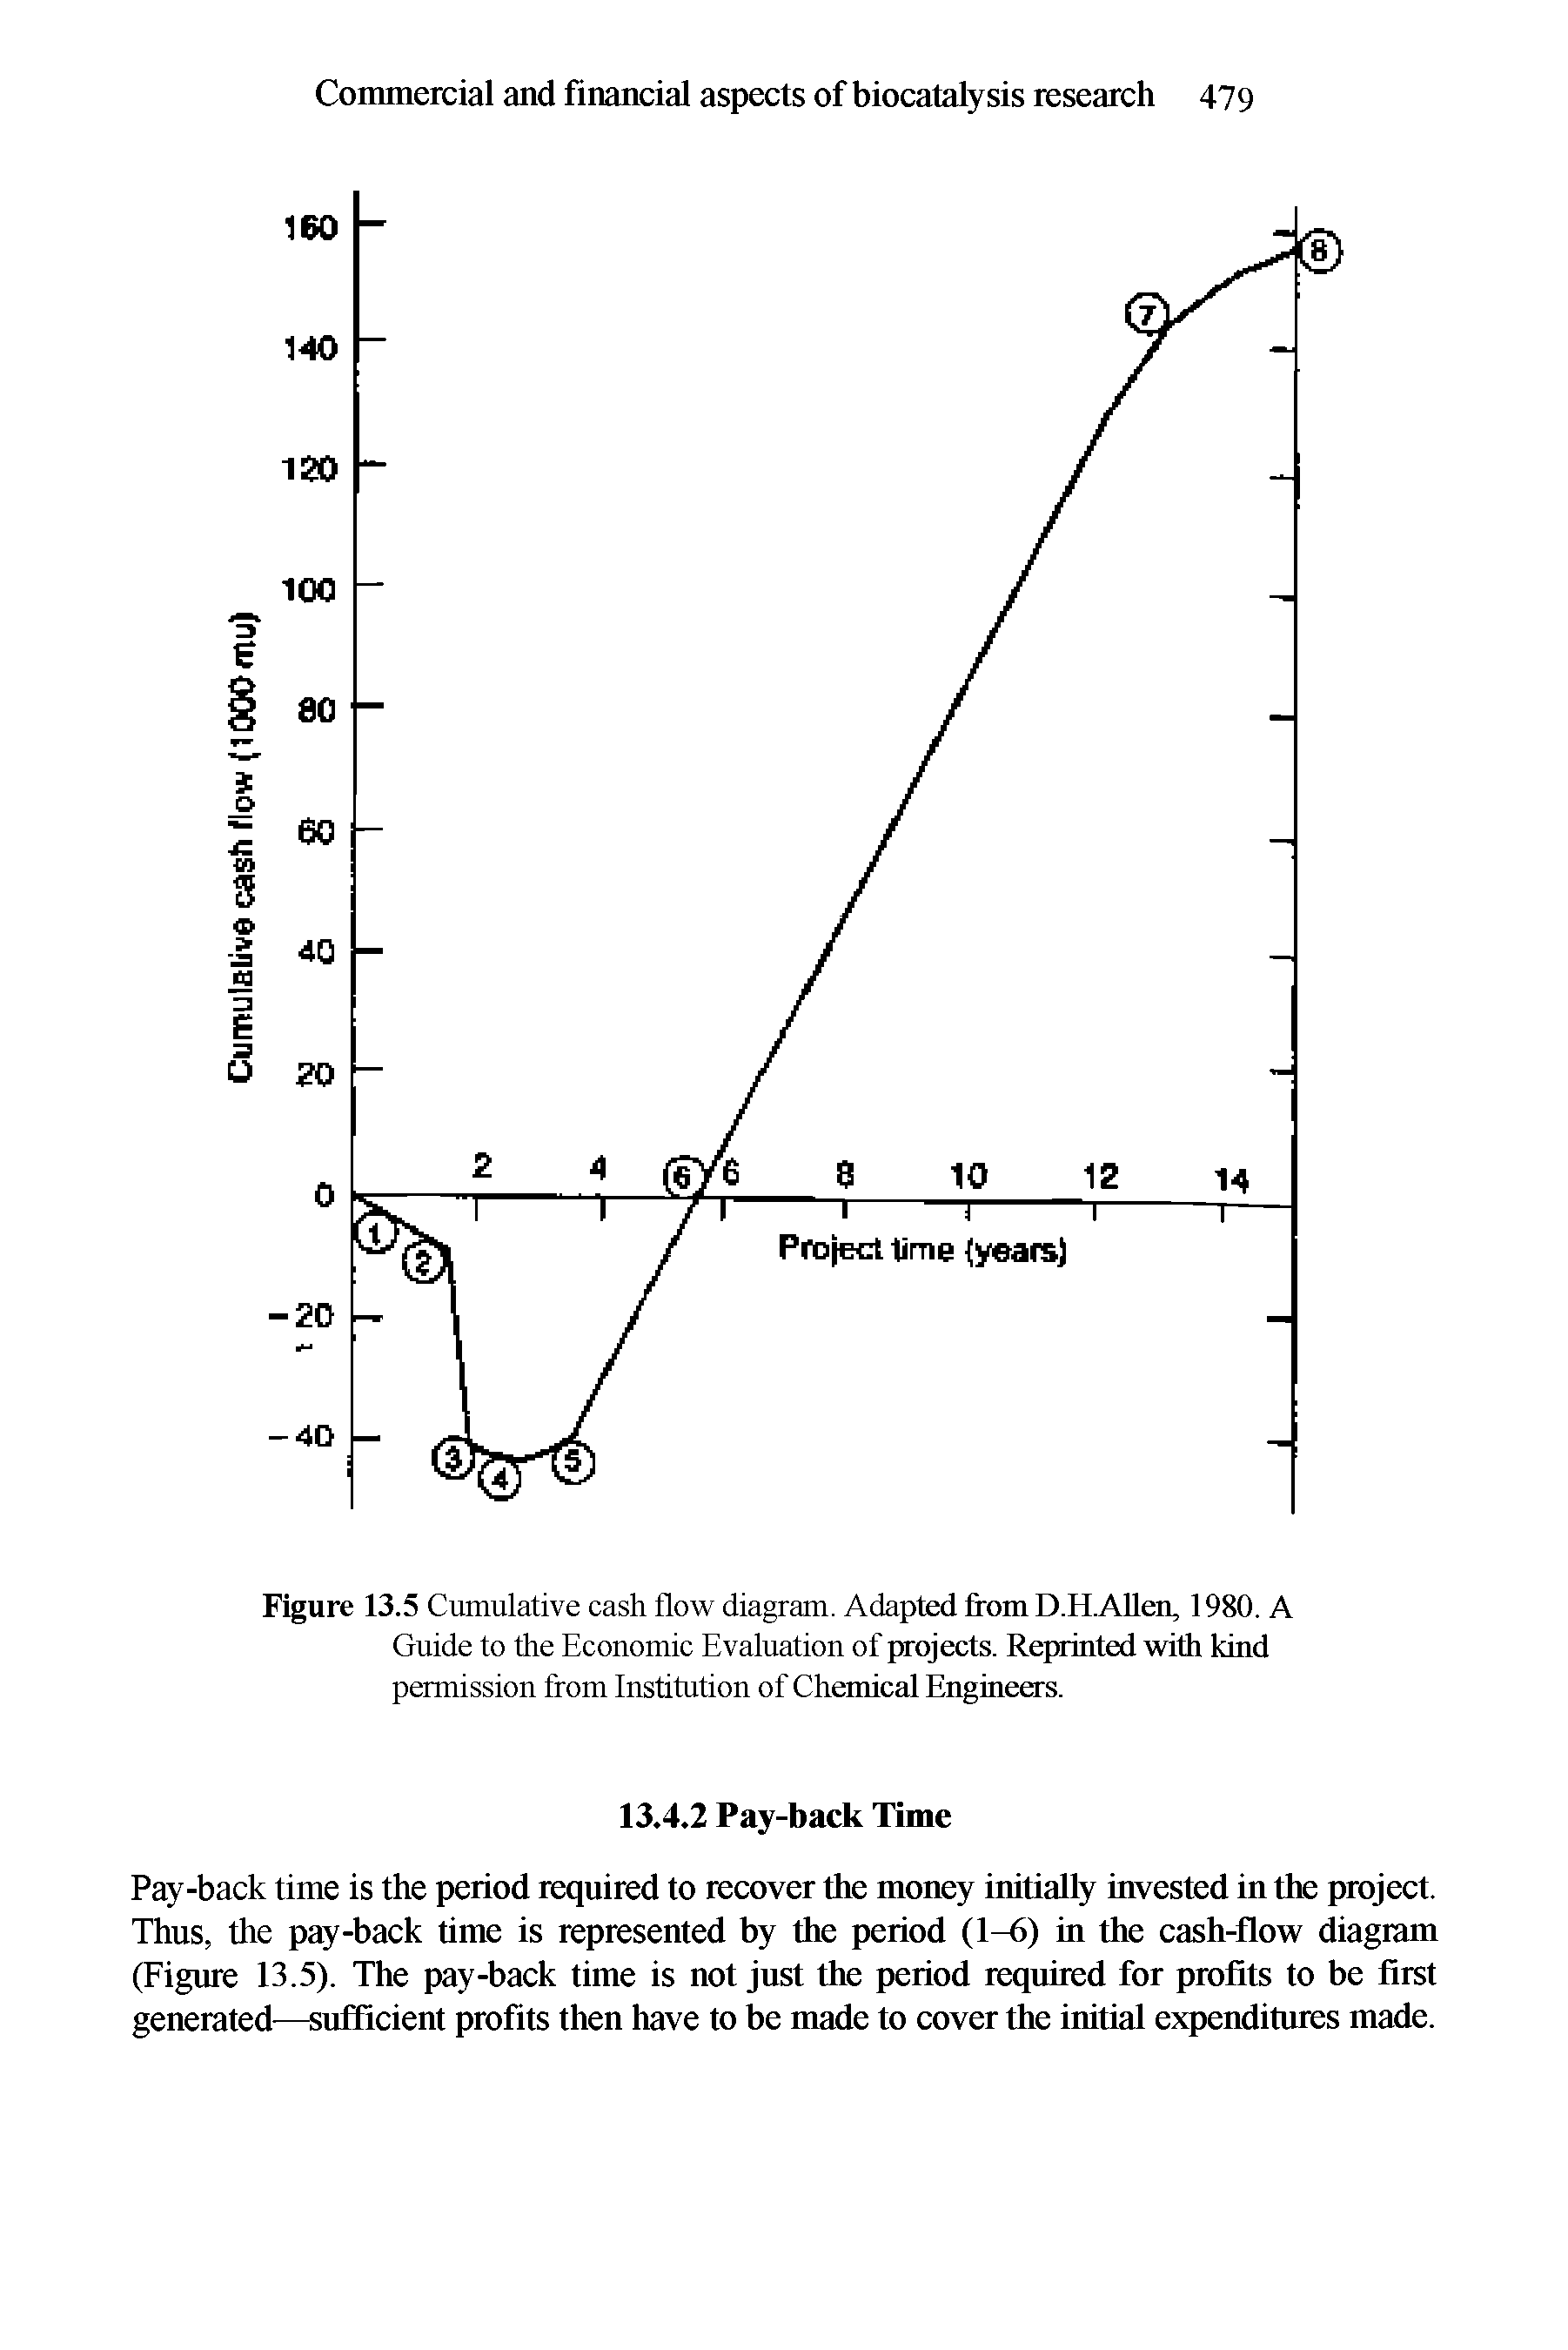 Figure 13.5 Cumulative cash flow diagram. Adapted from D.H.AUen, 1980. A Guide to the Economic Evaluation of projects. Reprinted with kind permission from institution of Chemical Engineers.